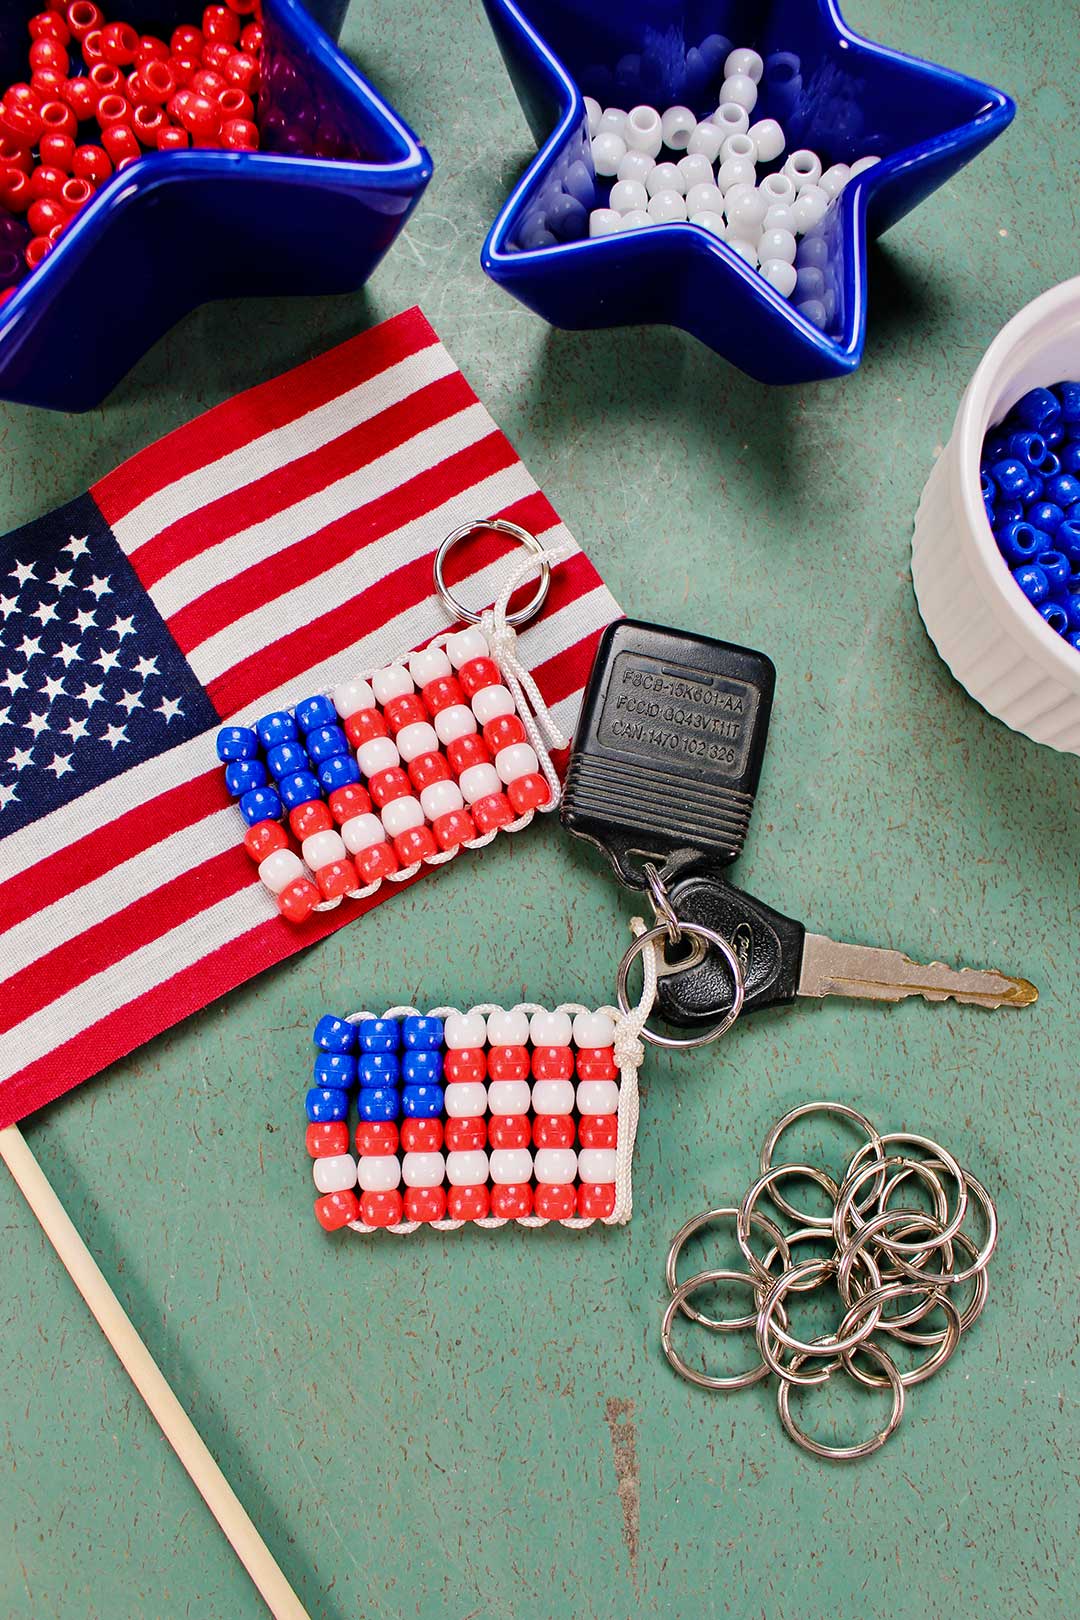 Two finished beaded American flag keychains with dishes of beads, a small flag and key rings on a green counter.